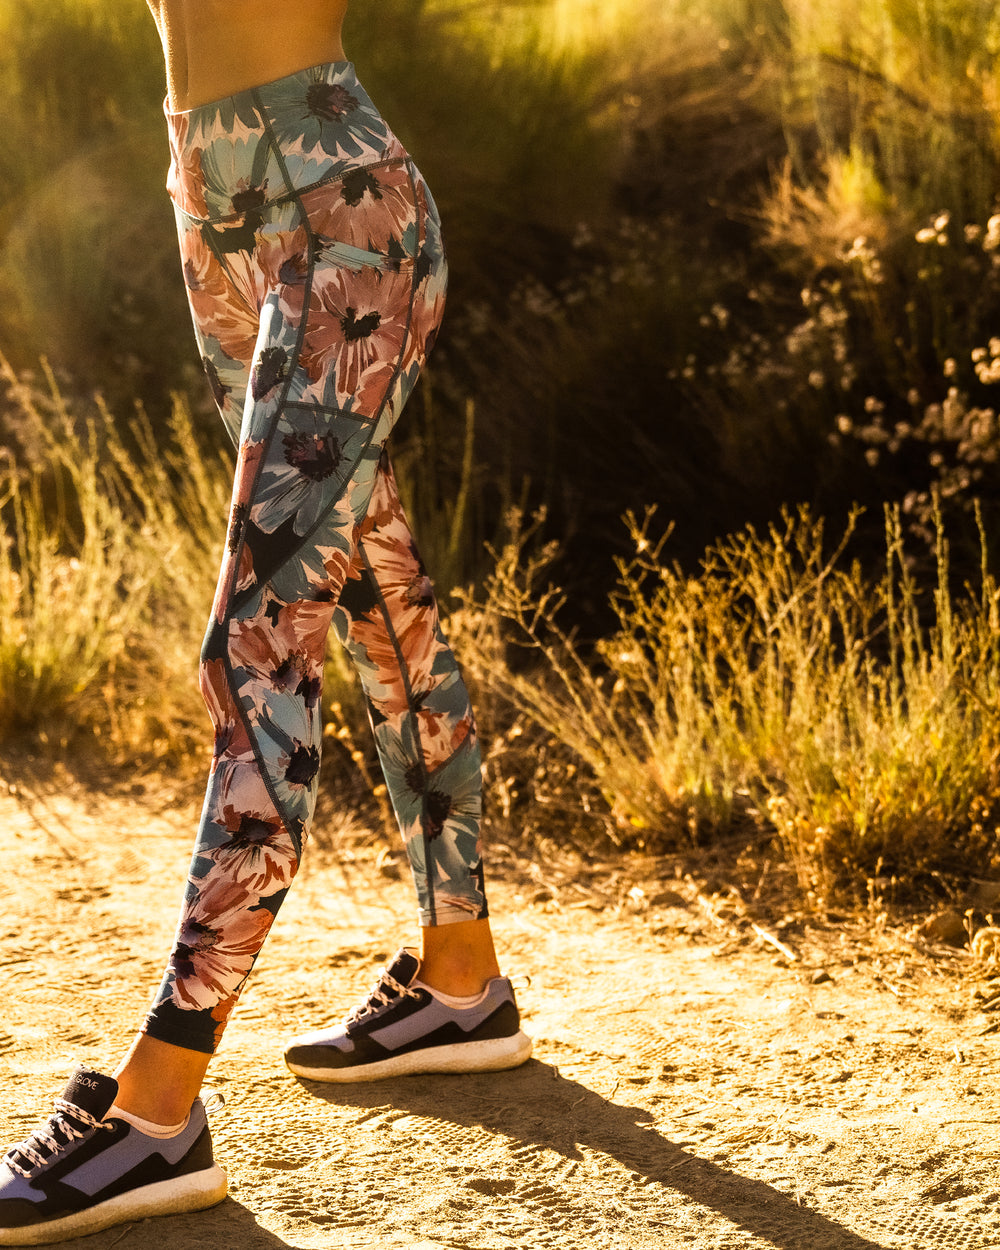 All-Over-Print Full-Length Legging With Pockets - Daisy Teal